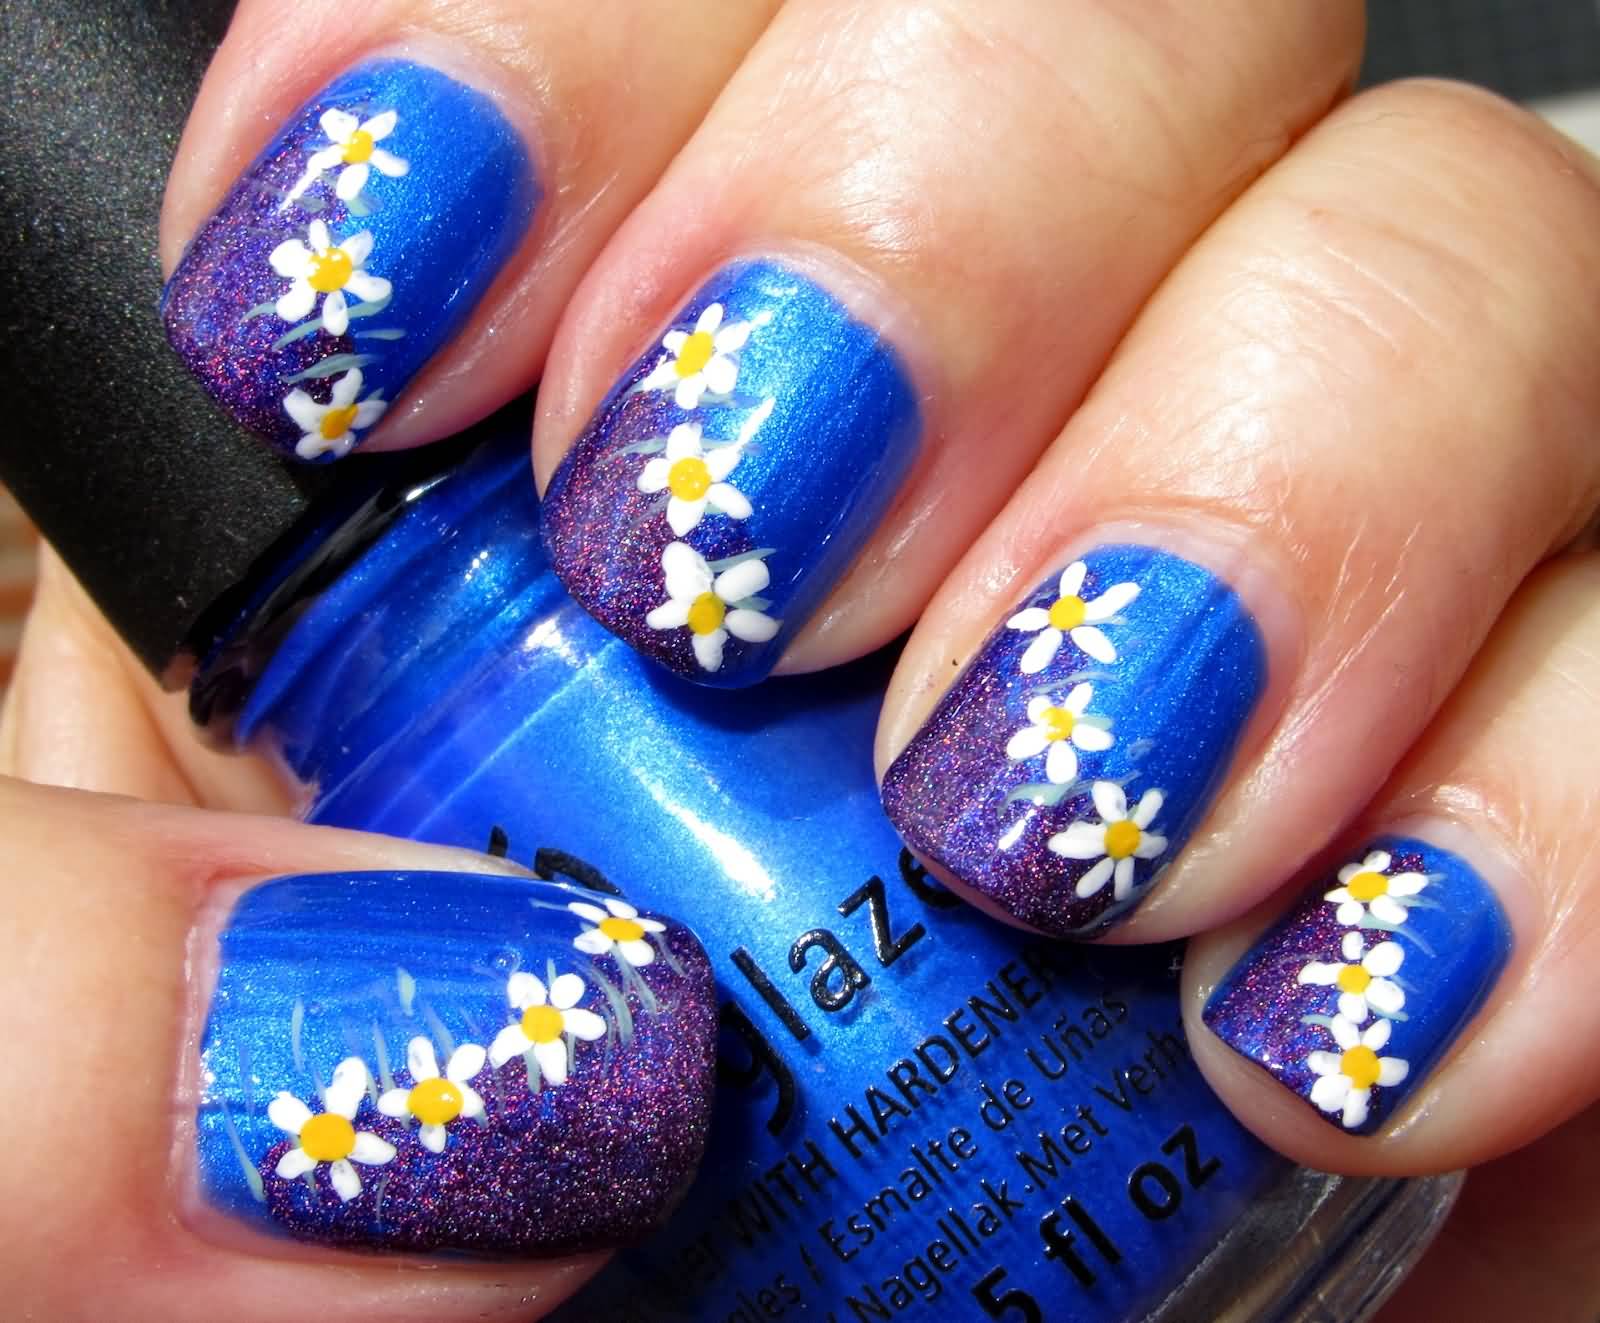 Royal Blue With Purple Glitter Tip And Daisy Flowers Nail Art